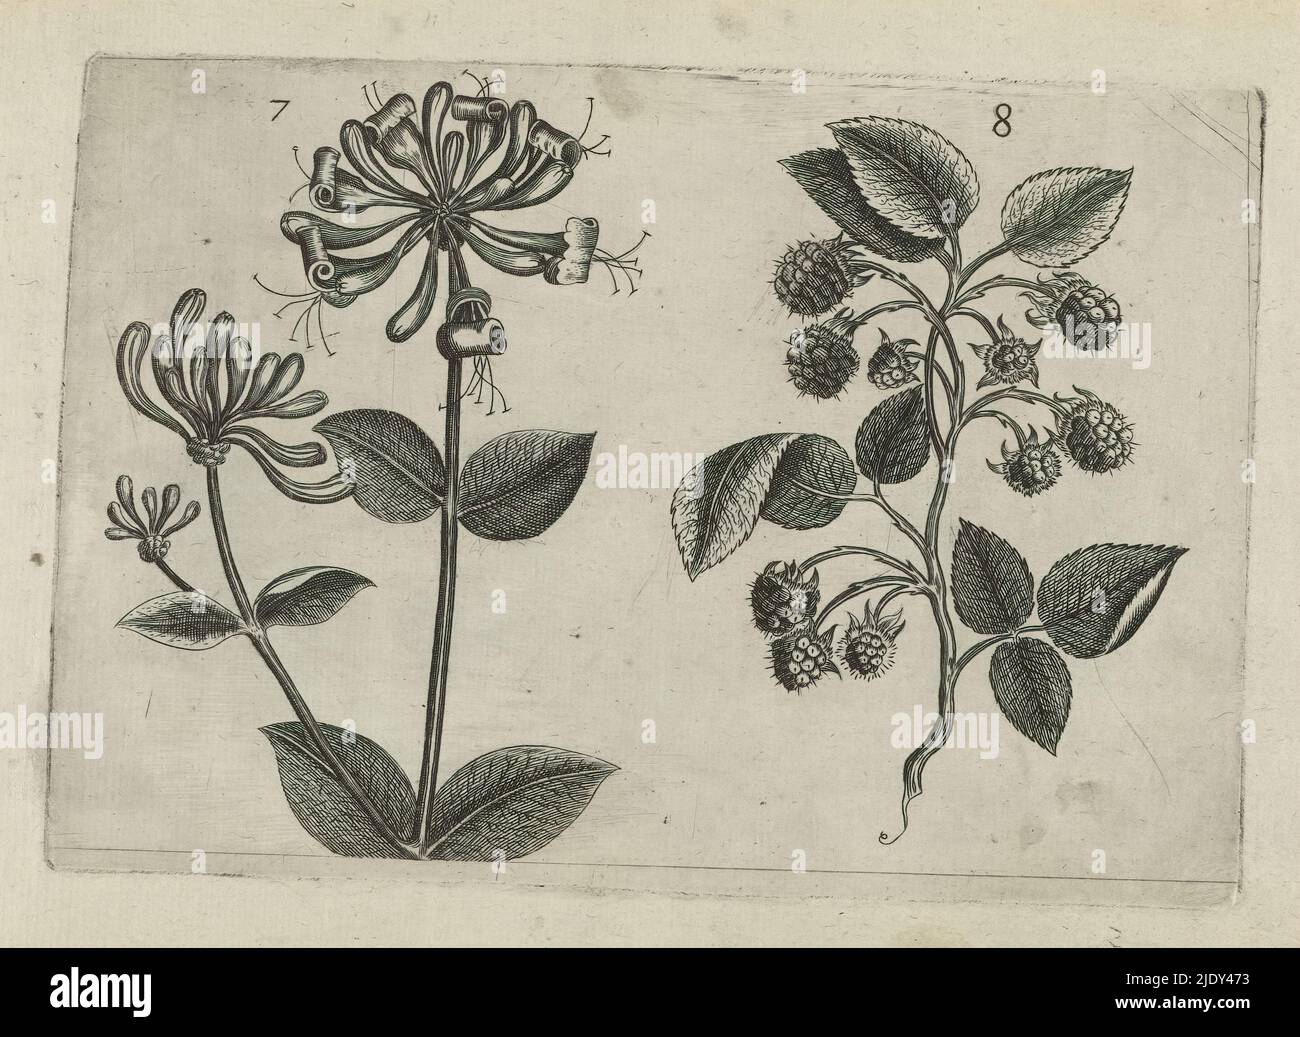 Honeysuckle and raspberry, Cognoscite lilia (series title), Honeysuckle (Lonicera caprifolia) and raspberry (Rubus idaeus), numbered 7 and 8., print maker: Crispijn van de Passe (I), (attributed to), after drawing by: Crispijn van de Passe (I), (attributed to), publisher: Crispijn van de Passe (I), print maker: Cologne, after drawing by: Cologne, publisher: Cologne, publisher: London, 1600 - 1604, paper, engraving, height 127 mm × width 205 mm, height 172 mm × width 272 mm Stock Photo